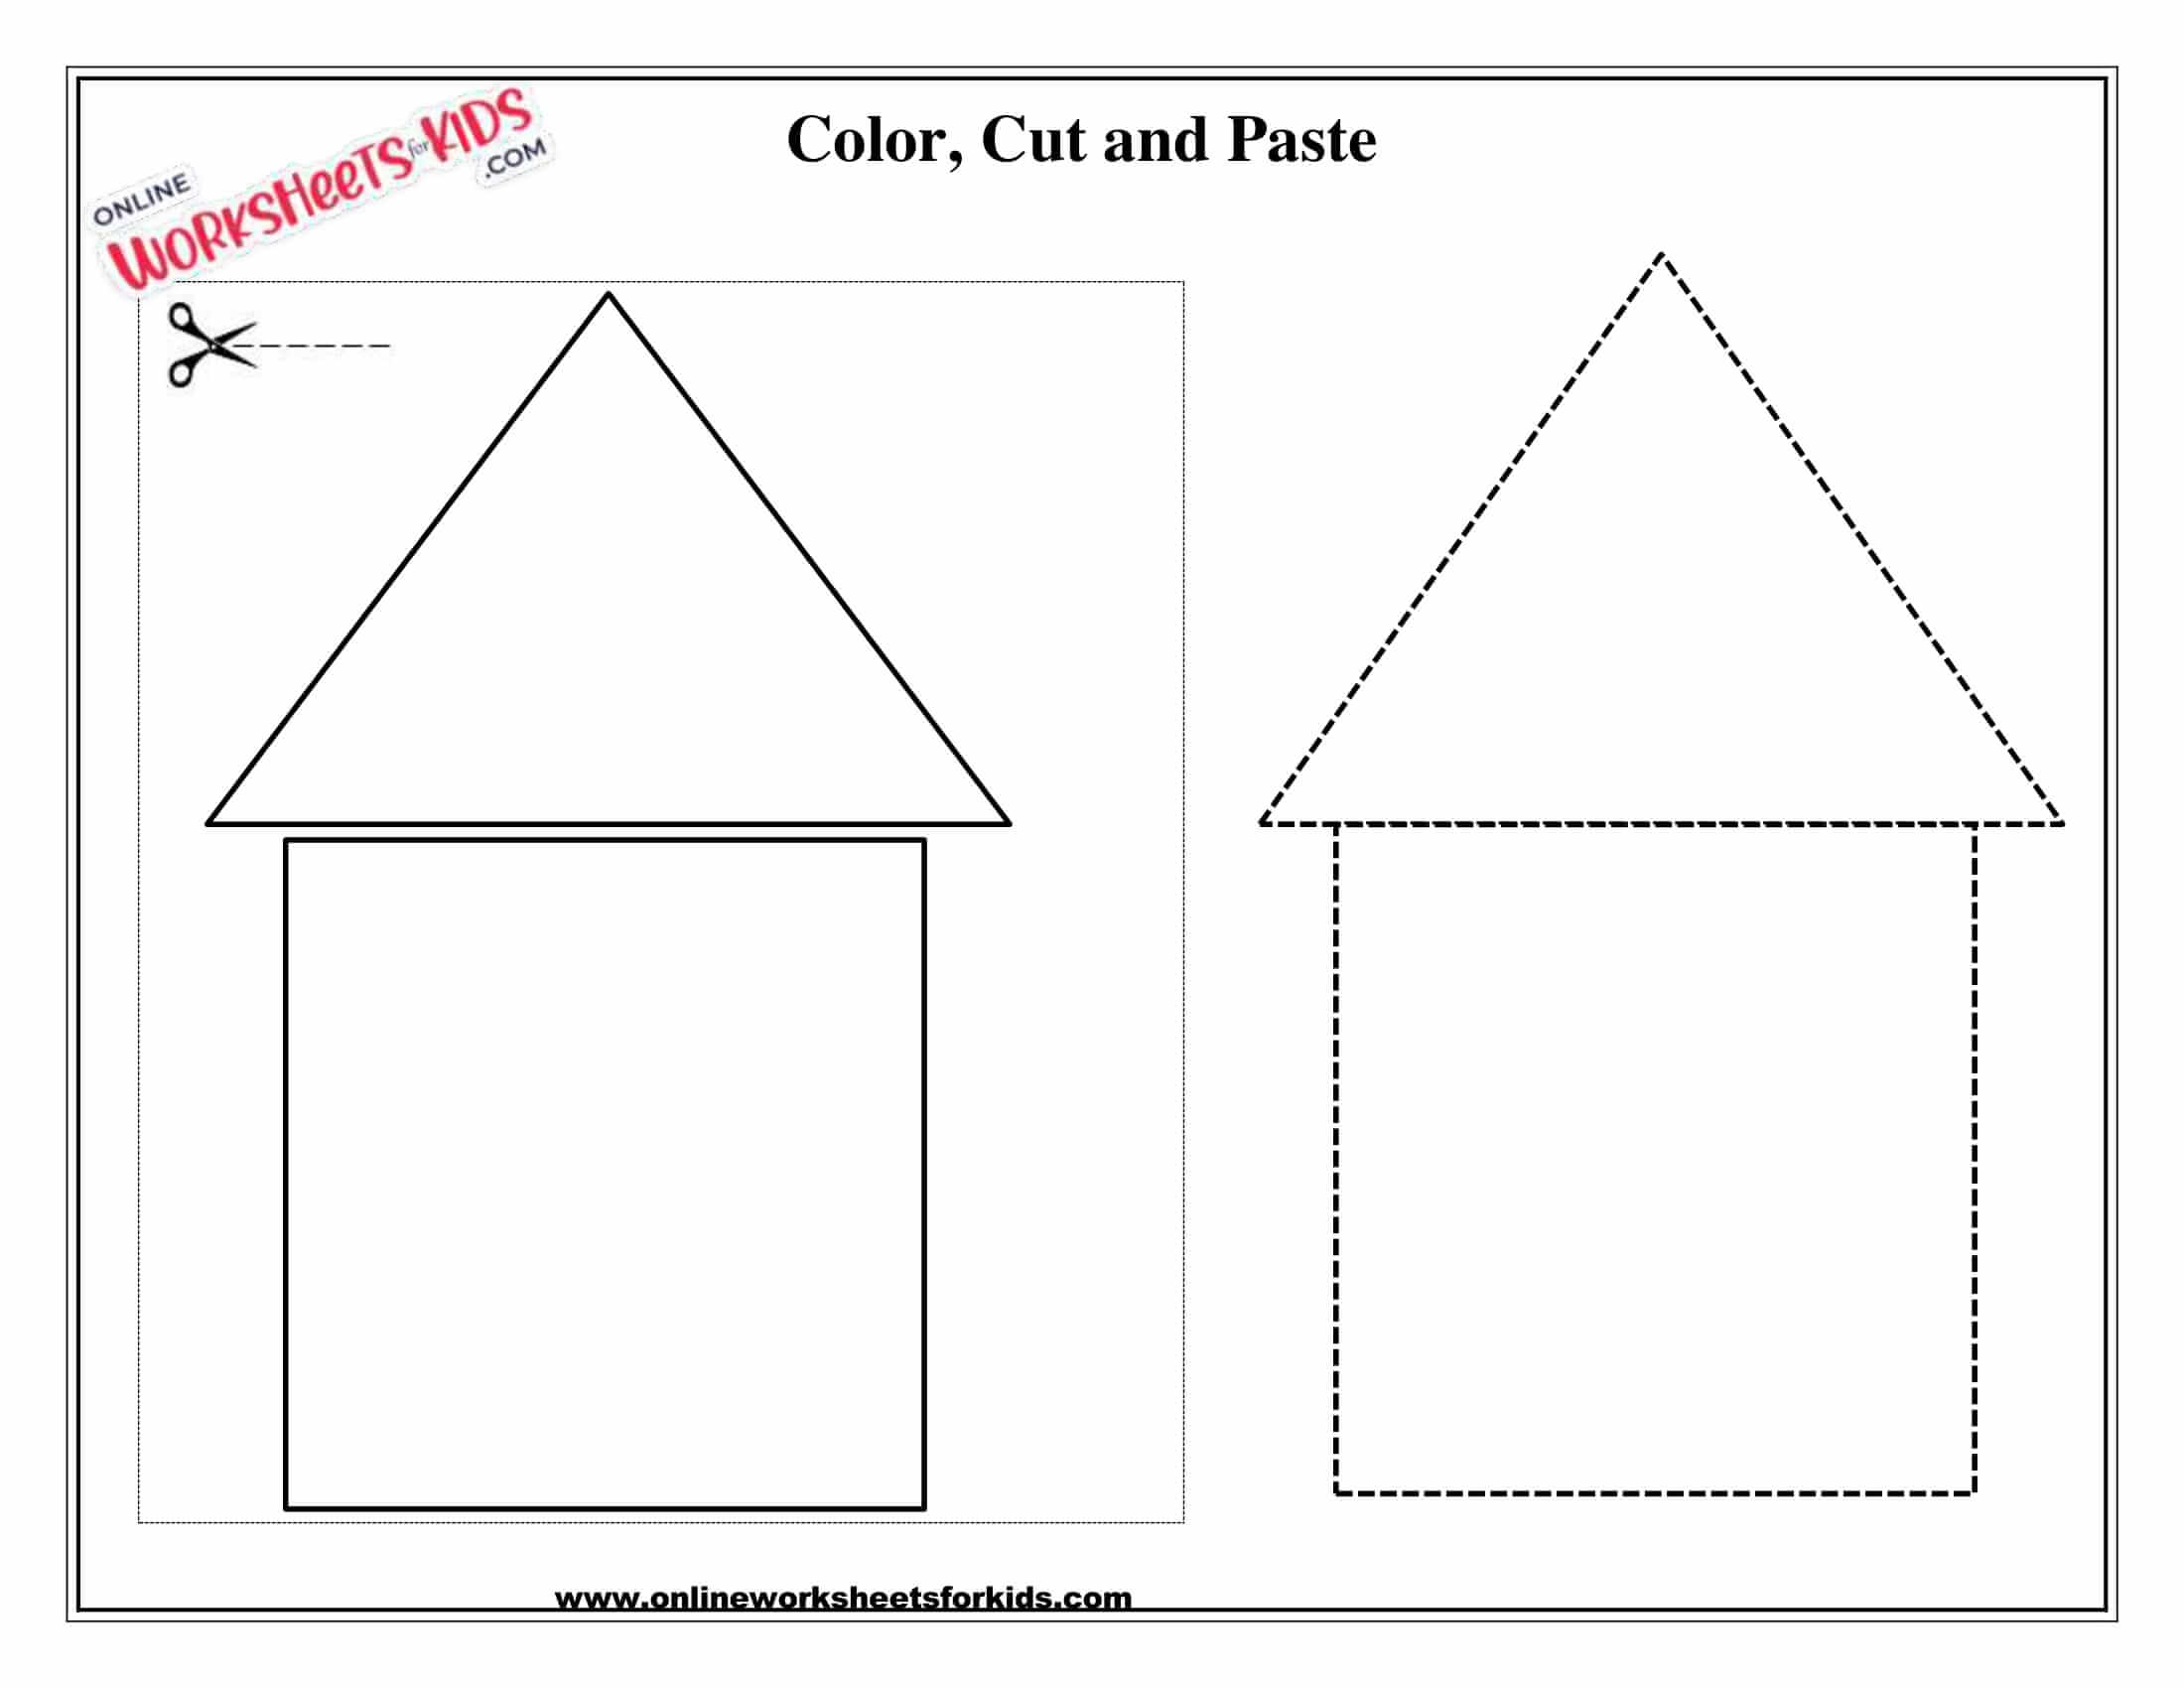 cut-and-paste-shapes-triangle-and-rectangle-5